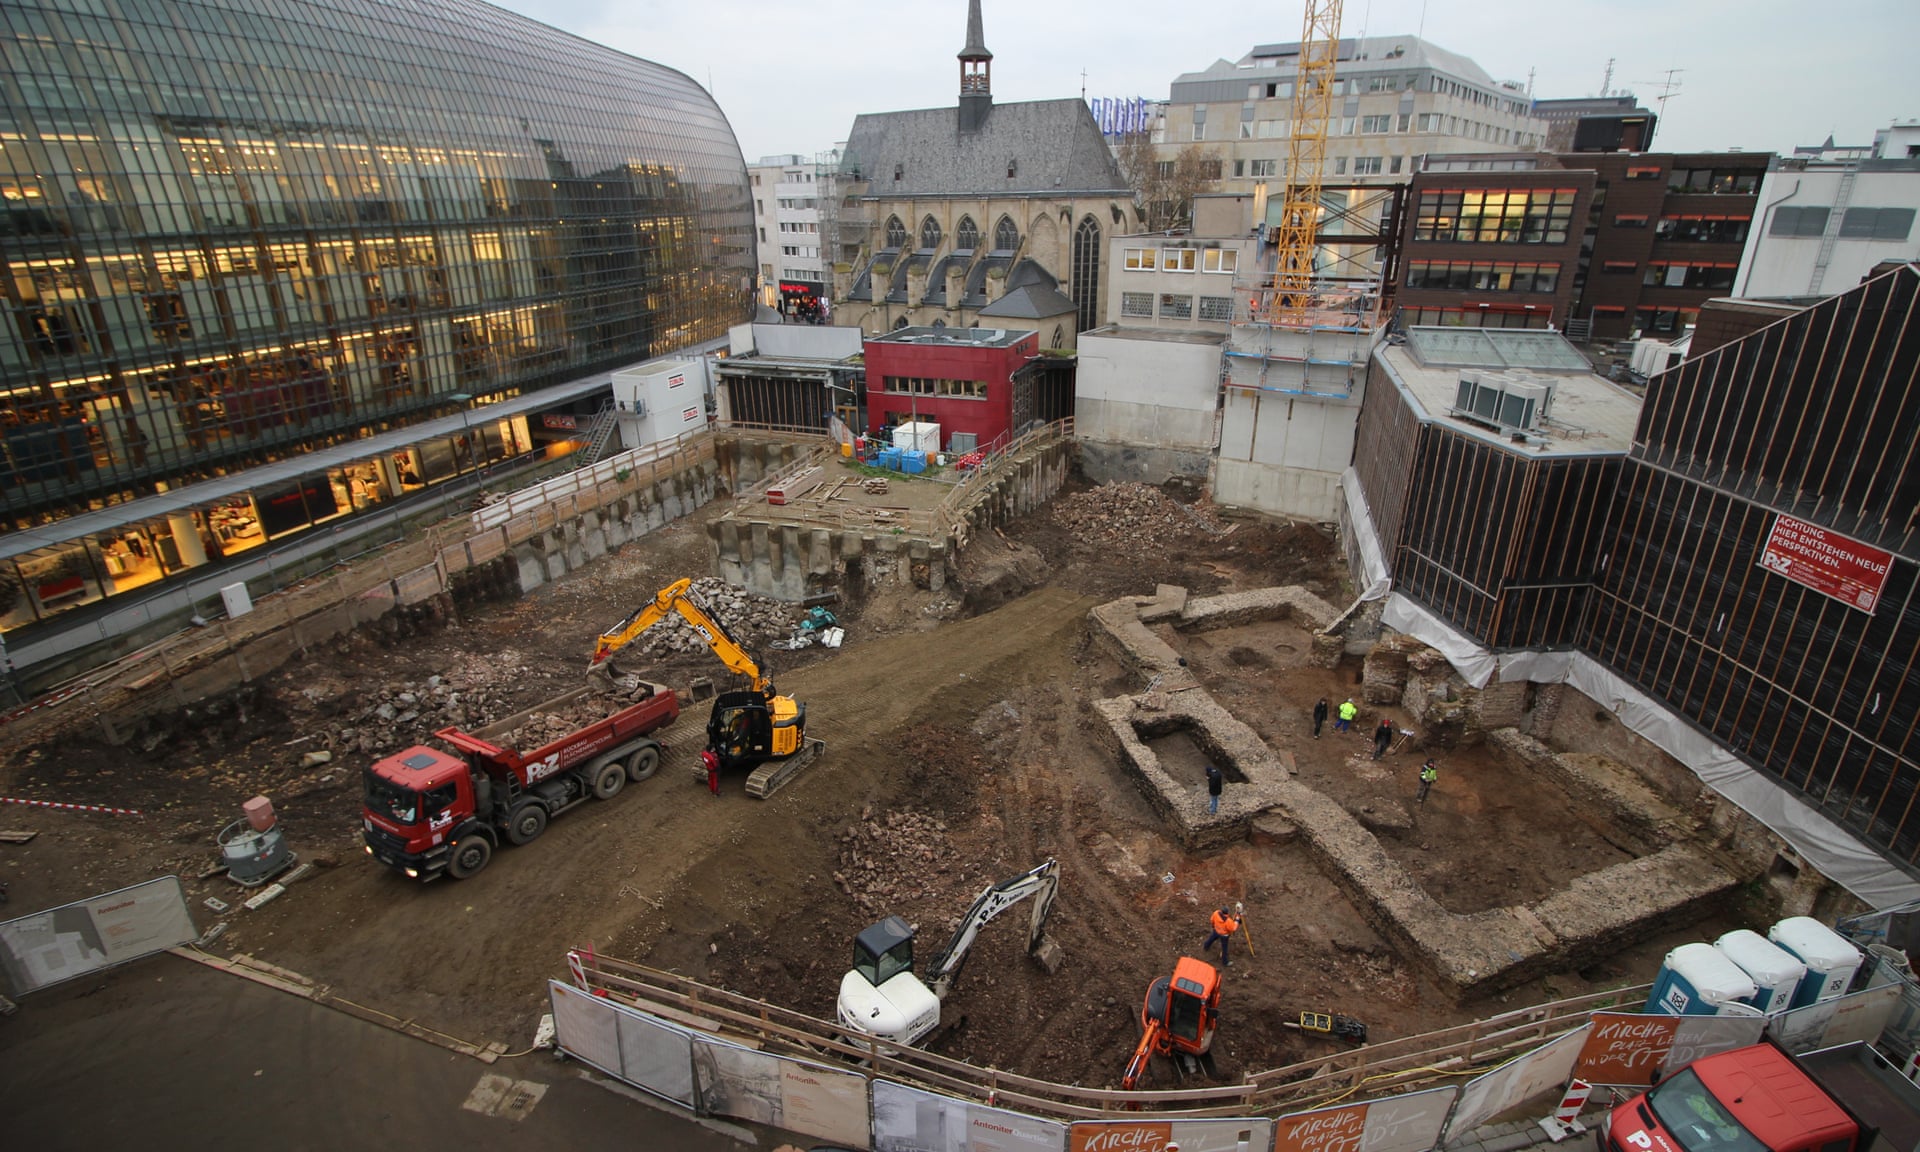 'Really incredible' ... the site of the second-century library discovered in Cologne. Photograph: Hi-flyFoto/Roman-Germanic Museum of Cologne